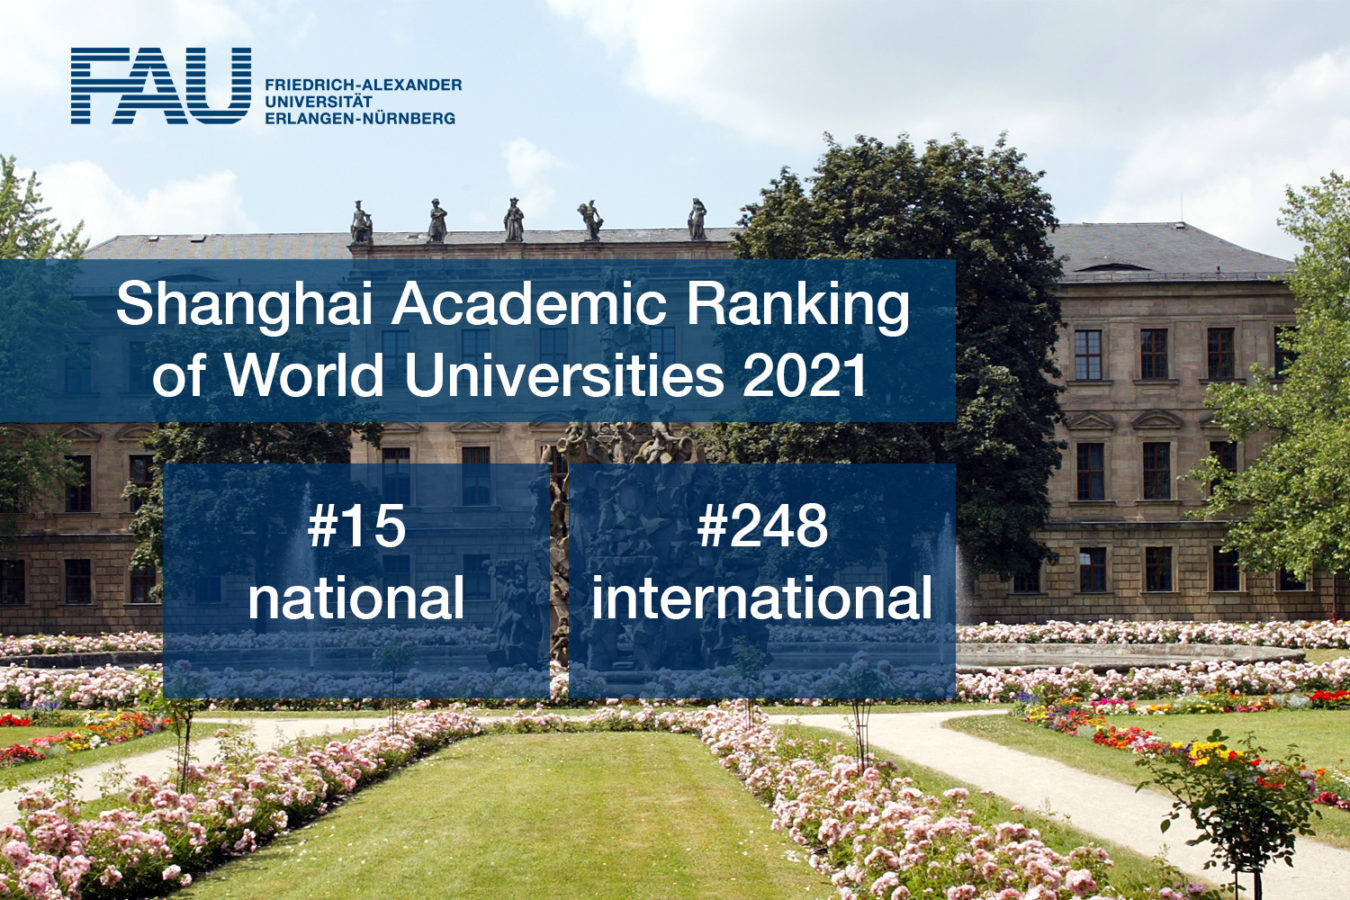 Shanghai Ranking 2021 FAU one of the top 20 universities in Germany